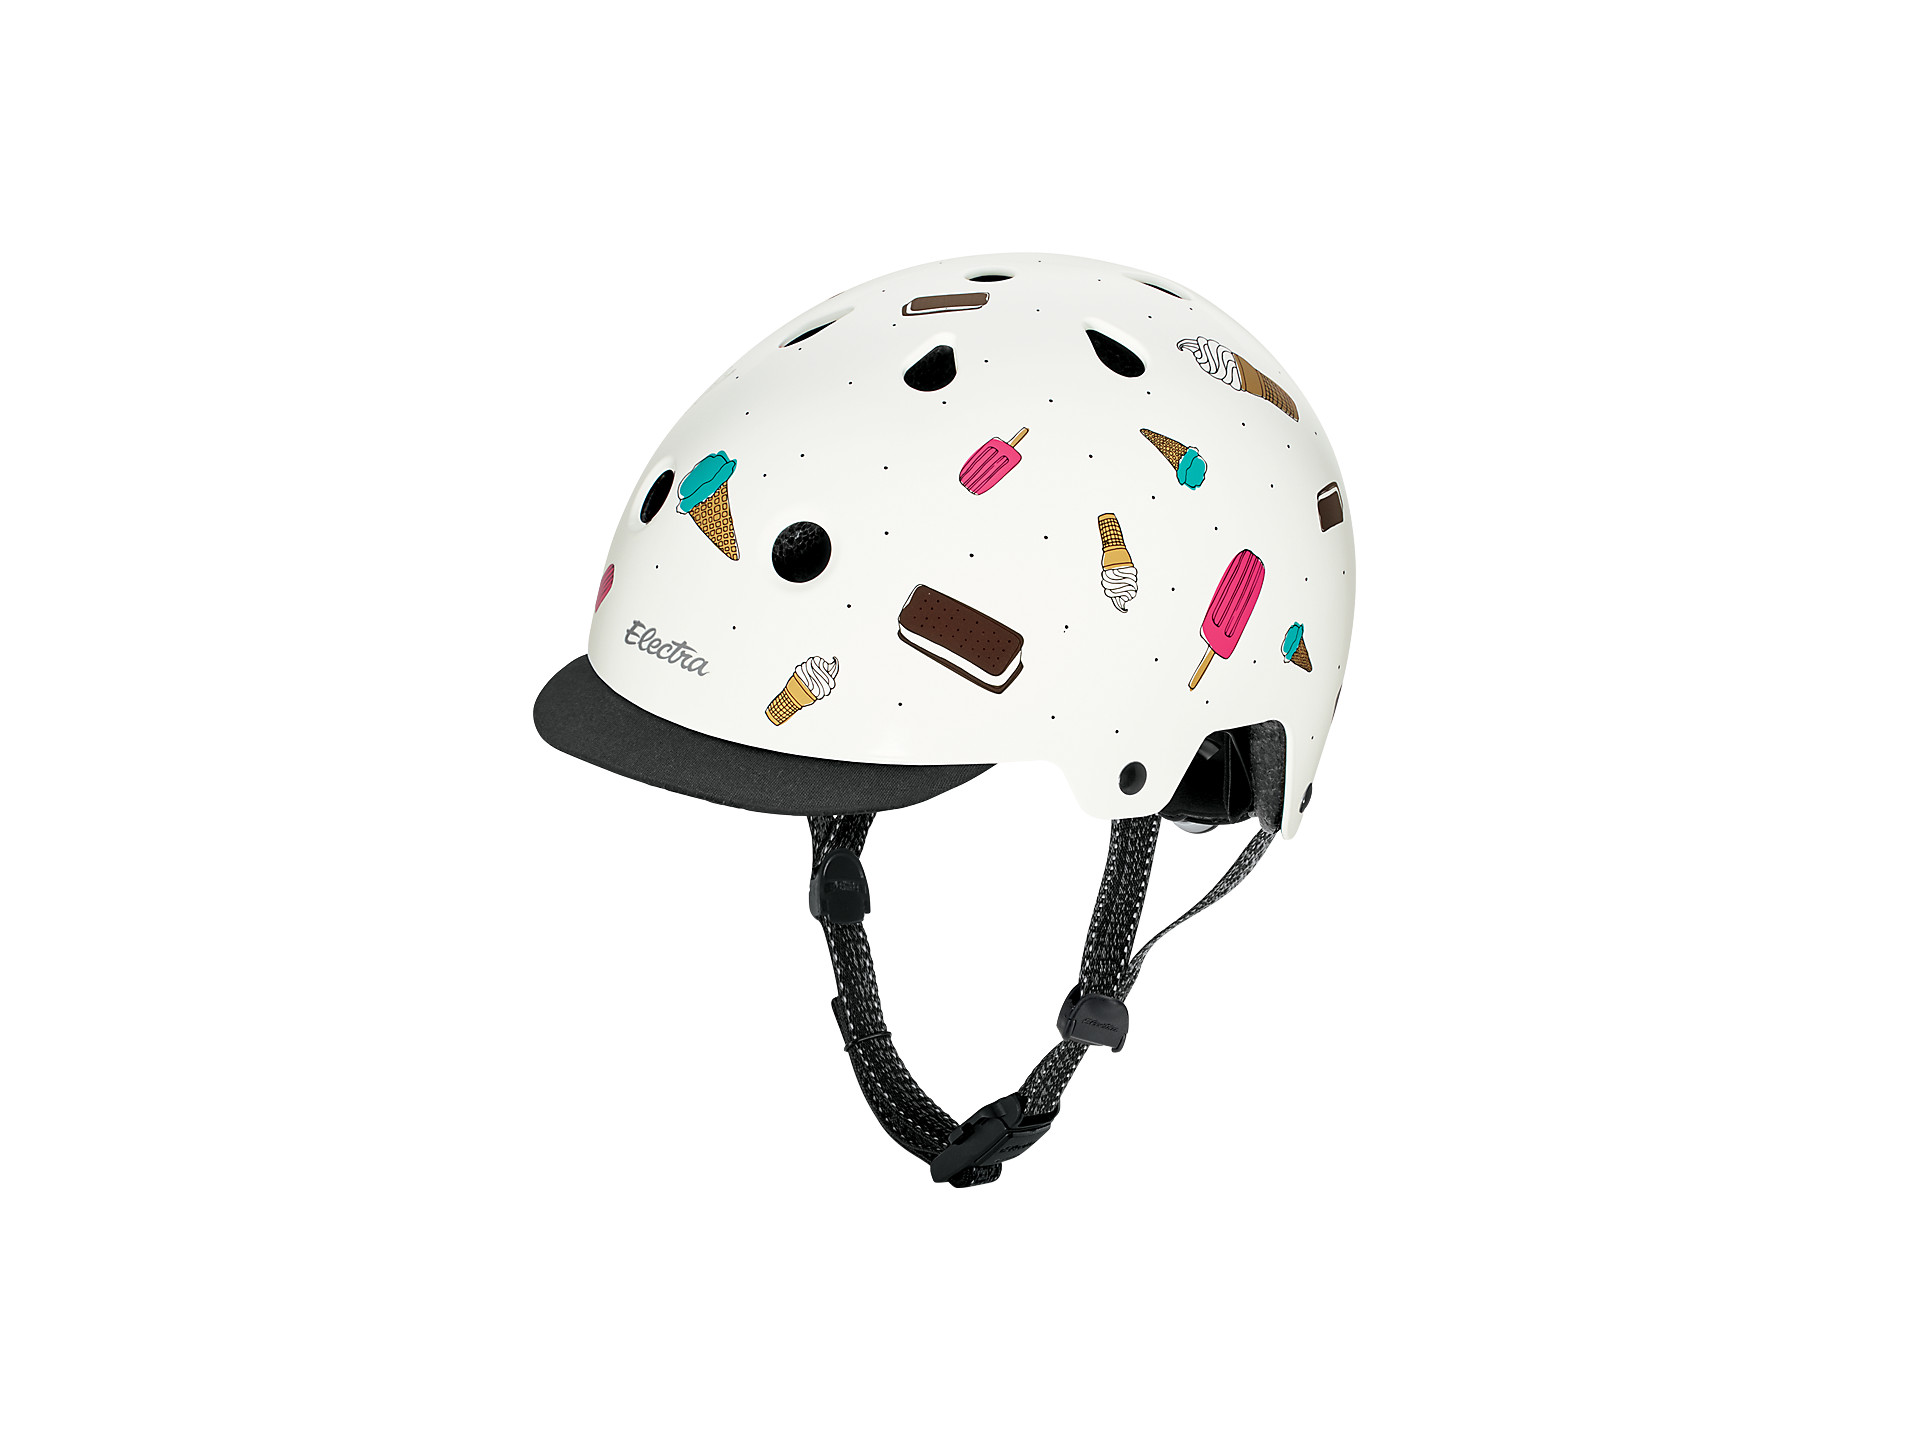 Electra Bicycle Helmet Cream Checkered ABS Hardshell CPSC Certified For Charity! 